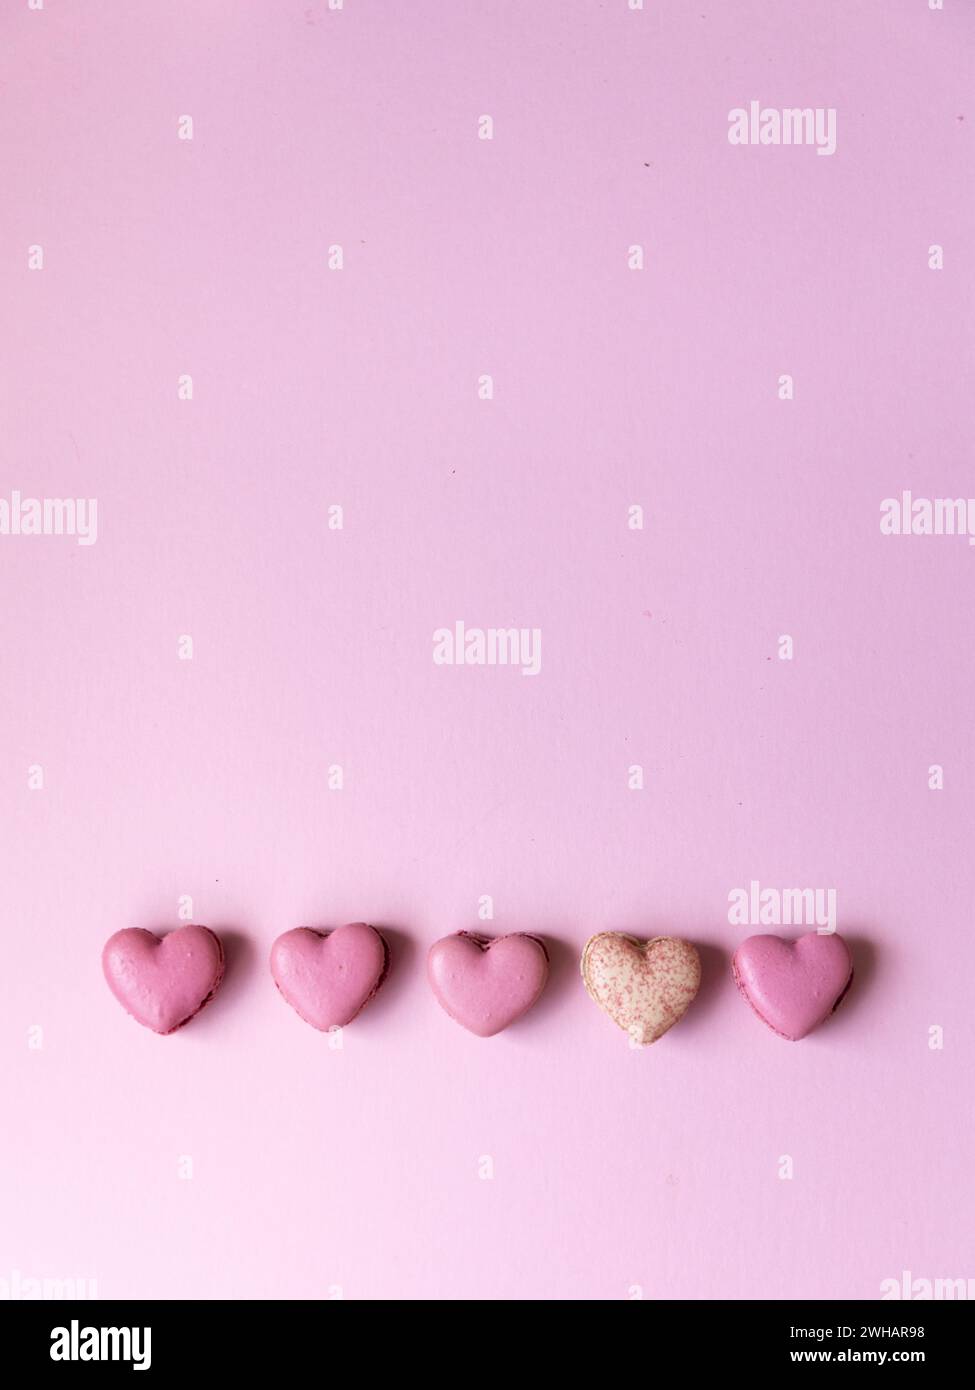 Five heart shaped pink macarons on bright pink backdrop Stock Photo